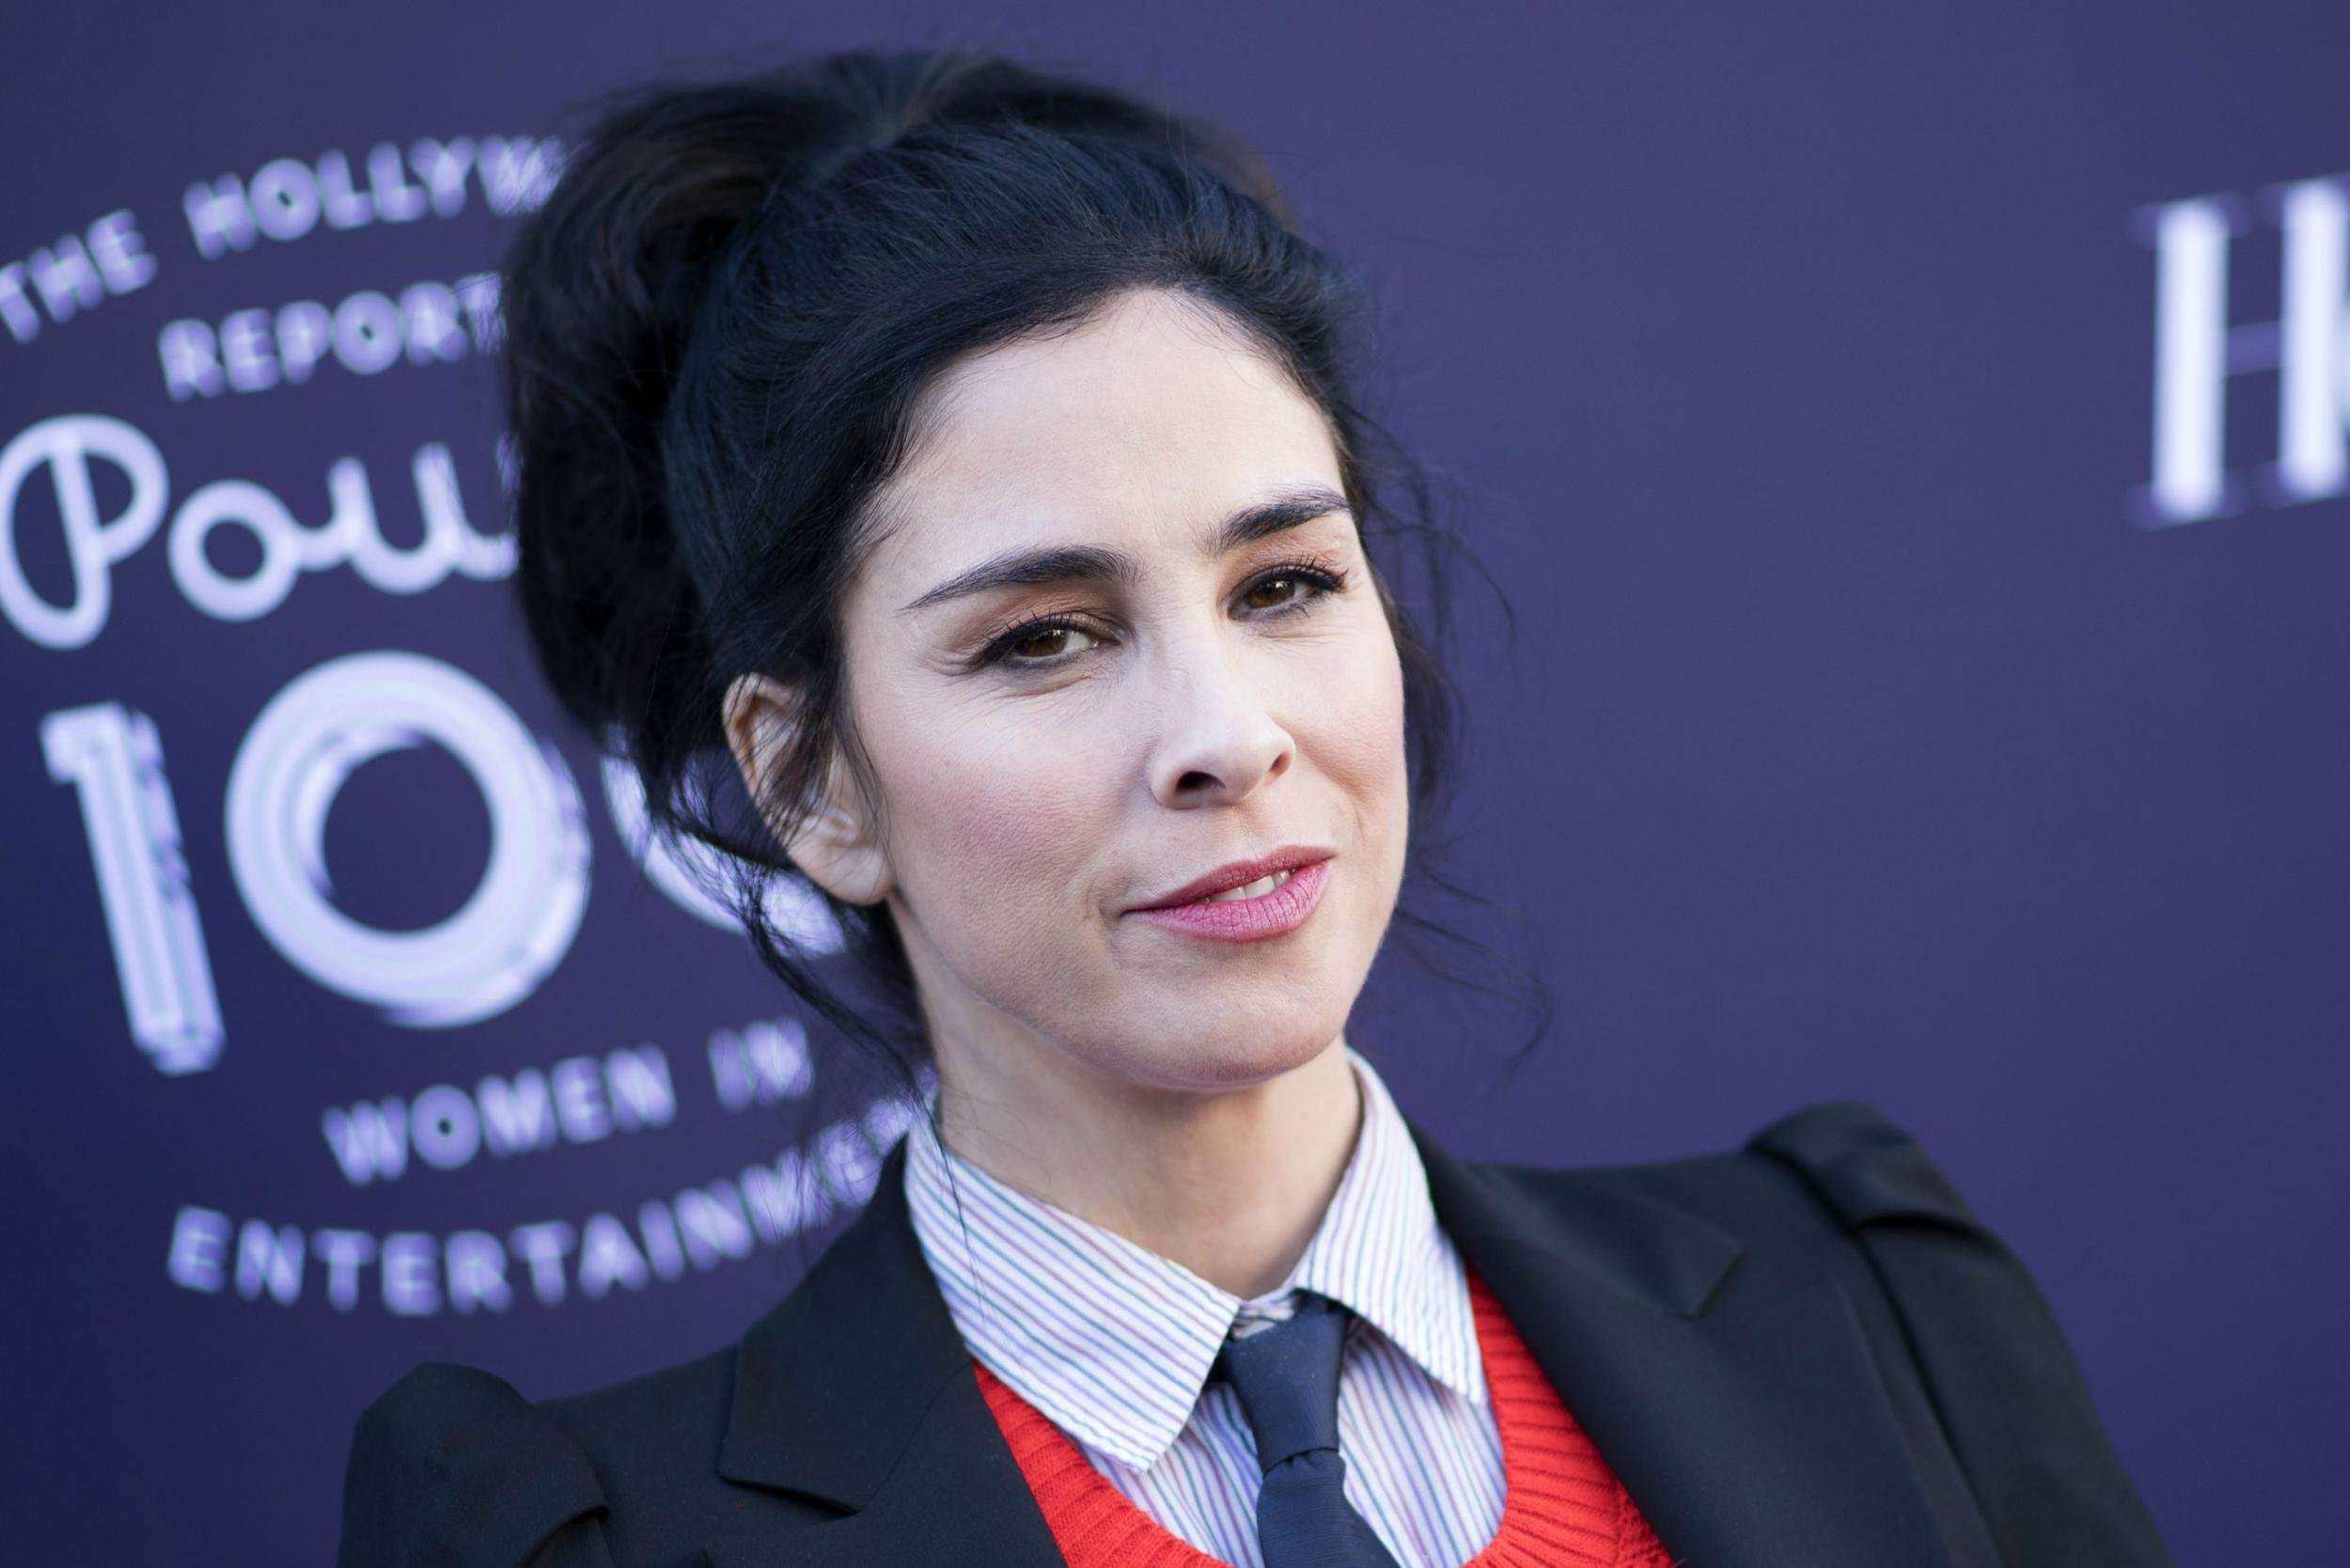 image for Sarah Silverman responds to troll by befriending him and paying for his medical treatment